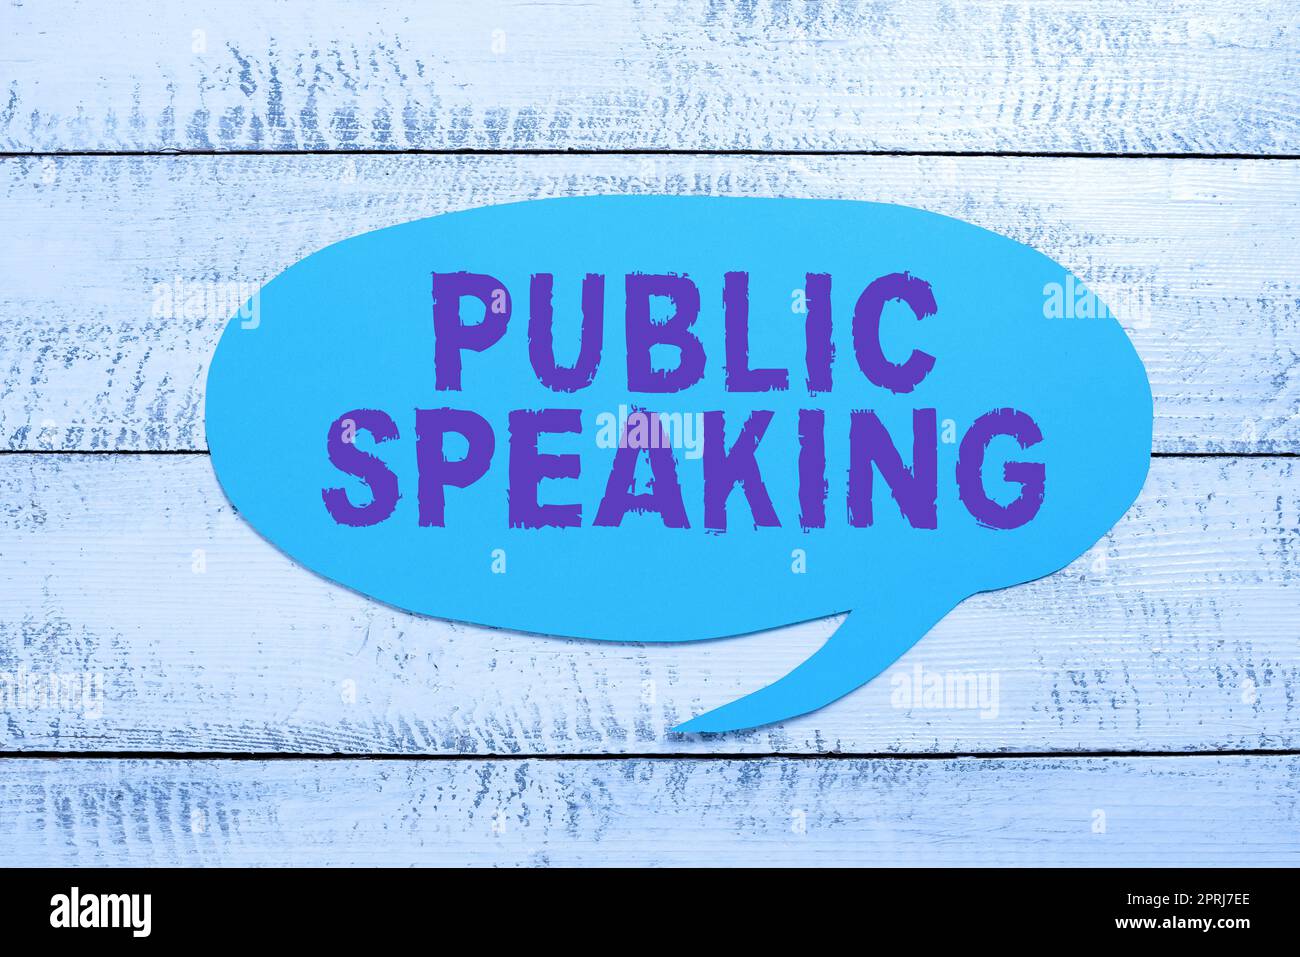 Writing displaying text Public Speaking talking people stage in subject Conference Presentation. Concept meaning talking showing stage in subject Conference Presentation Speech Bubble On Floor With Important Information Written In. Stock Photo